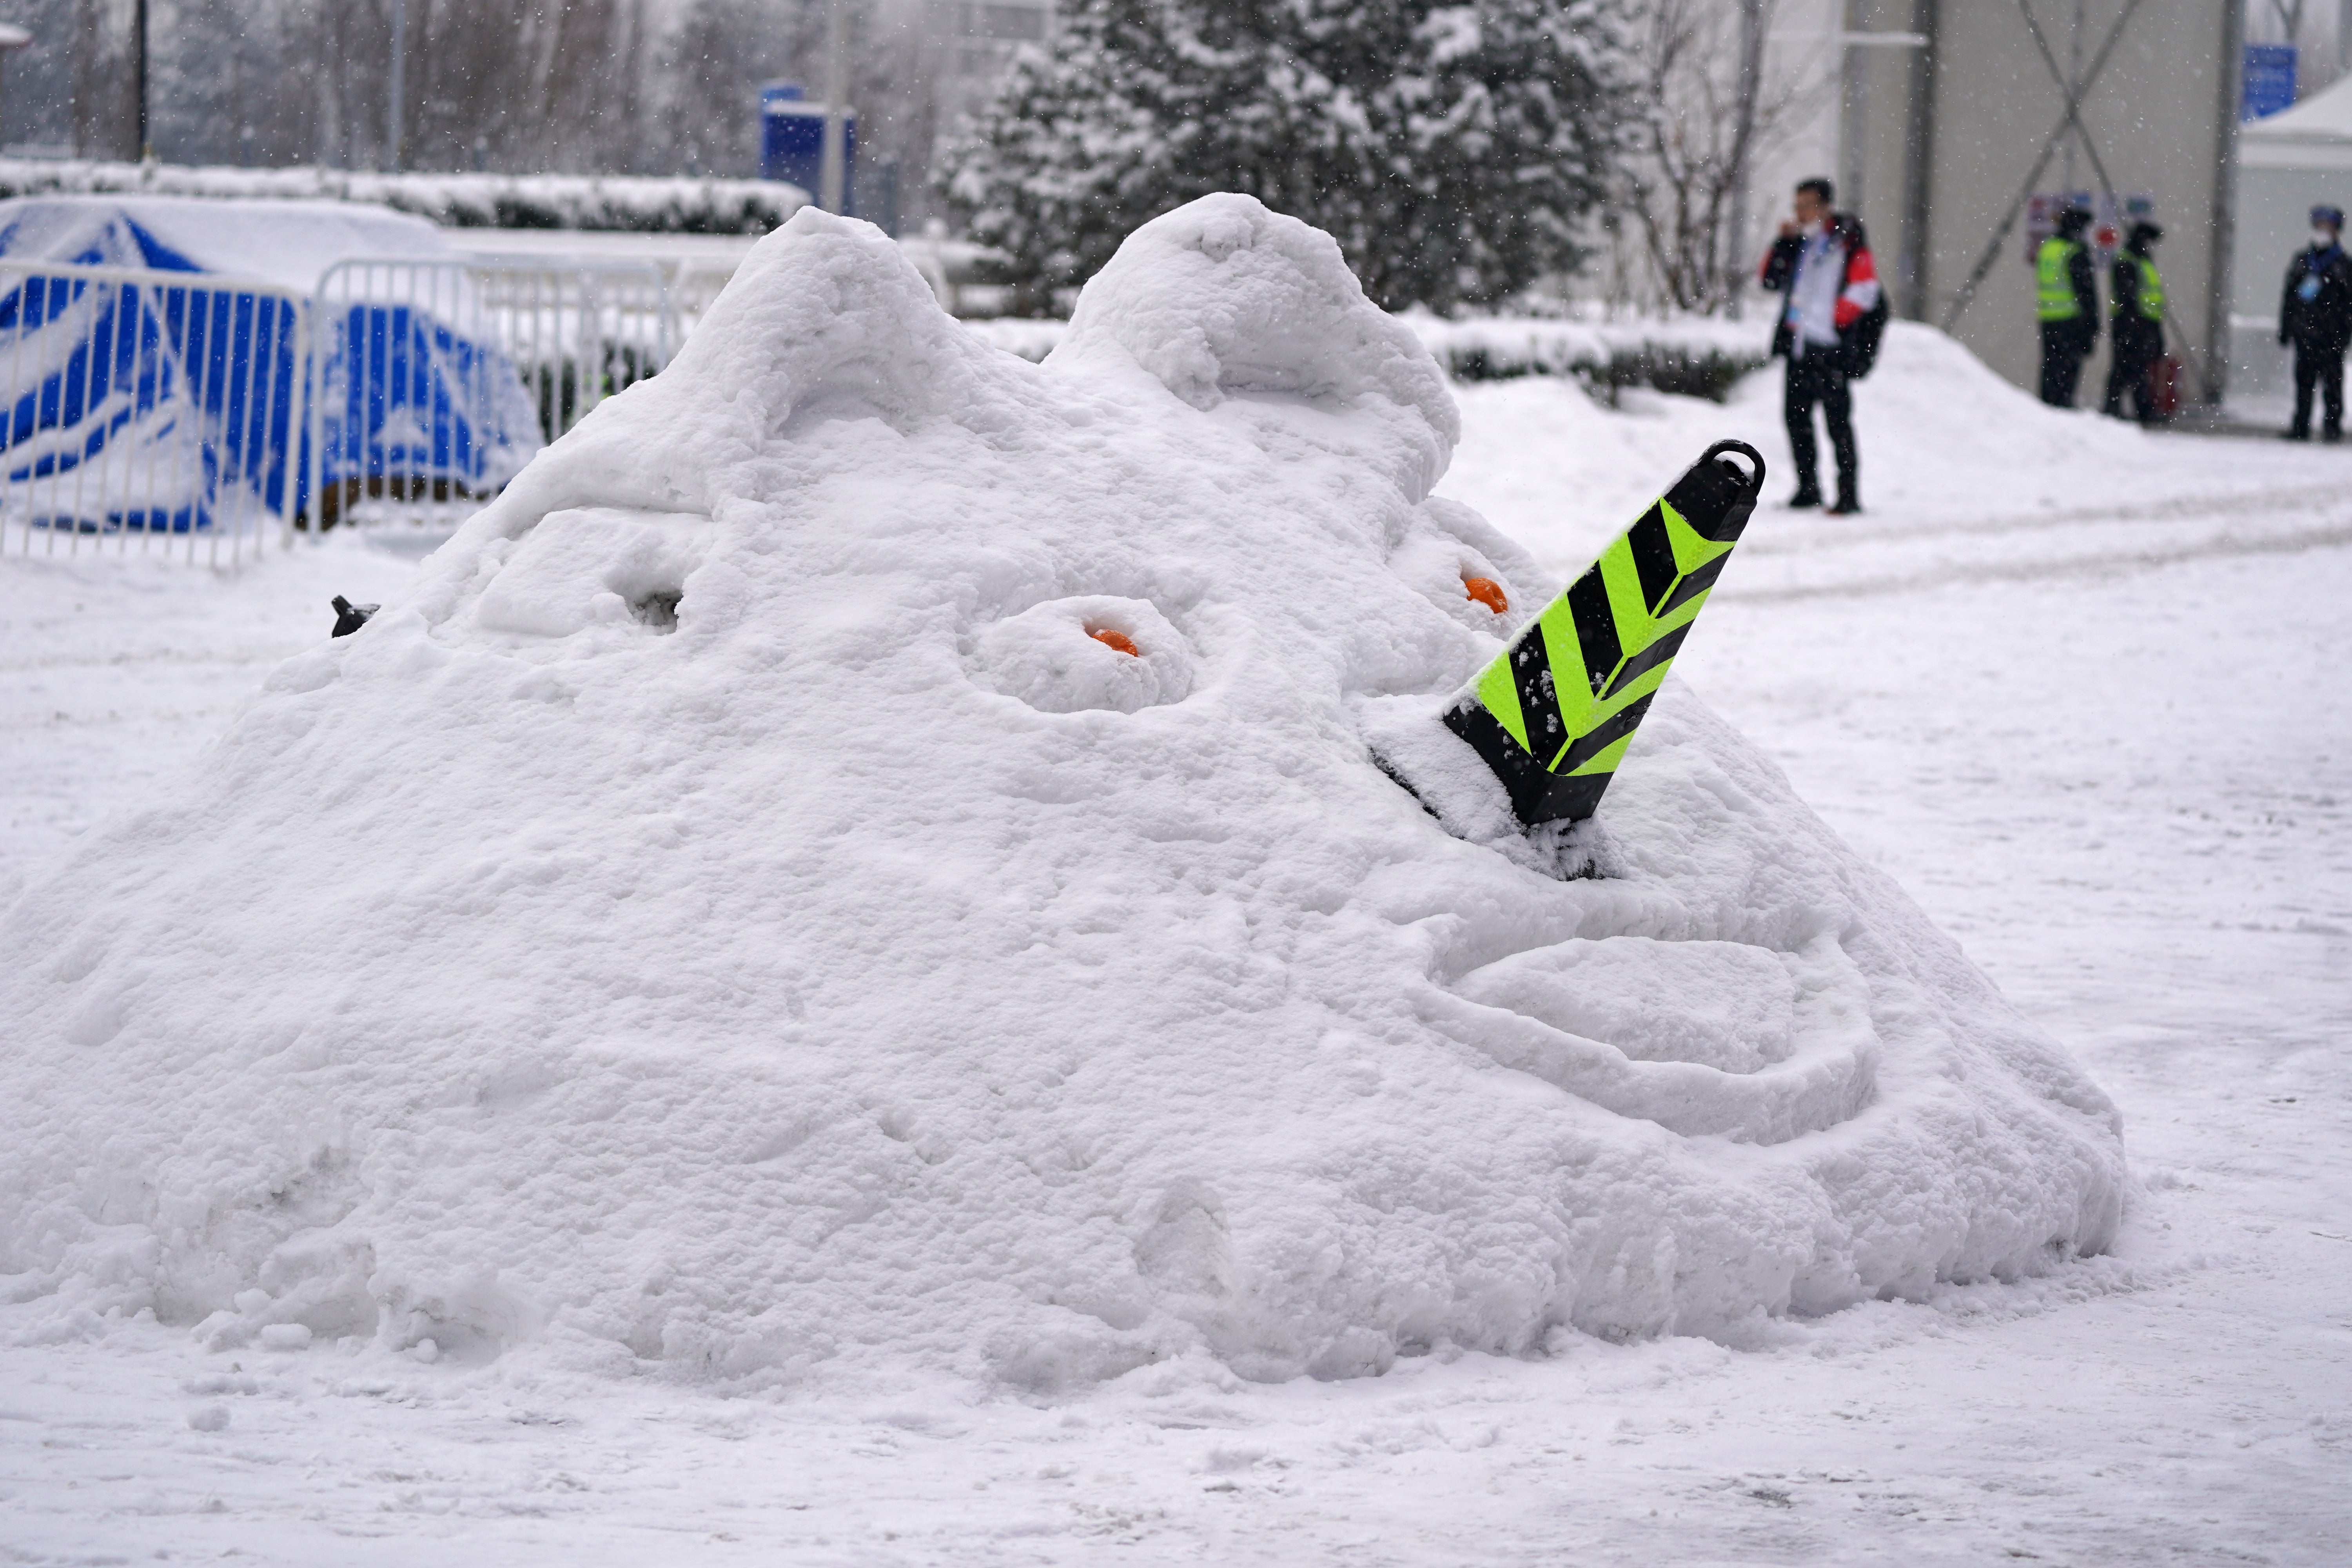 A snowman is built outside the National Aquatics Centre during day nine of the Beijing 2022 Winter Olympic Games in China (Andrew Milligan/PA)